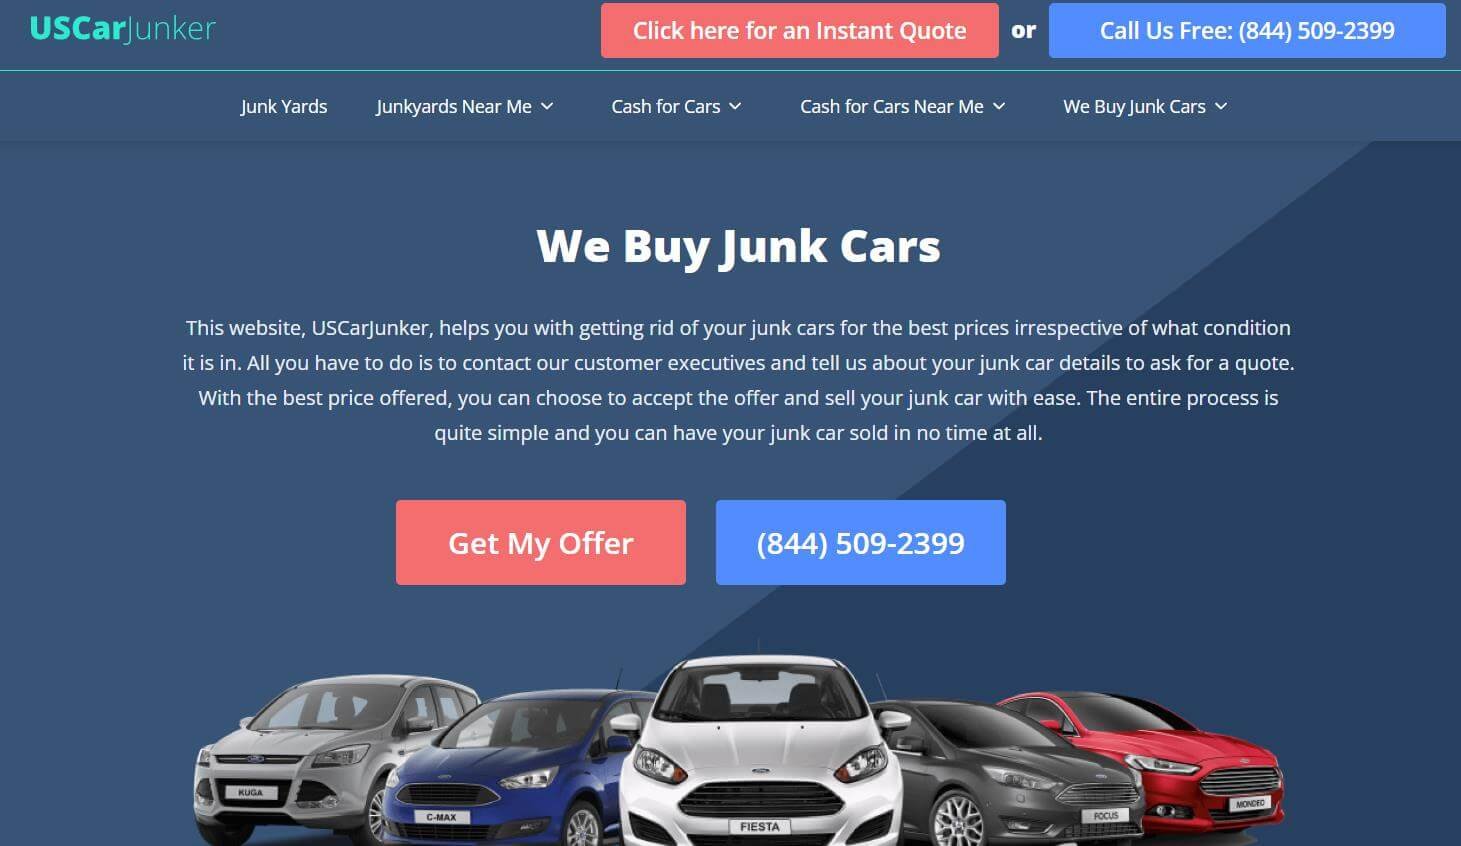 Where Can I Sell My Junk Car For Cash Quickly